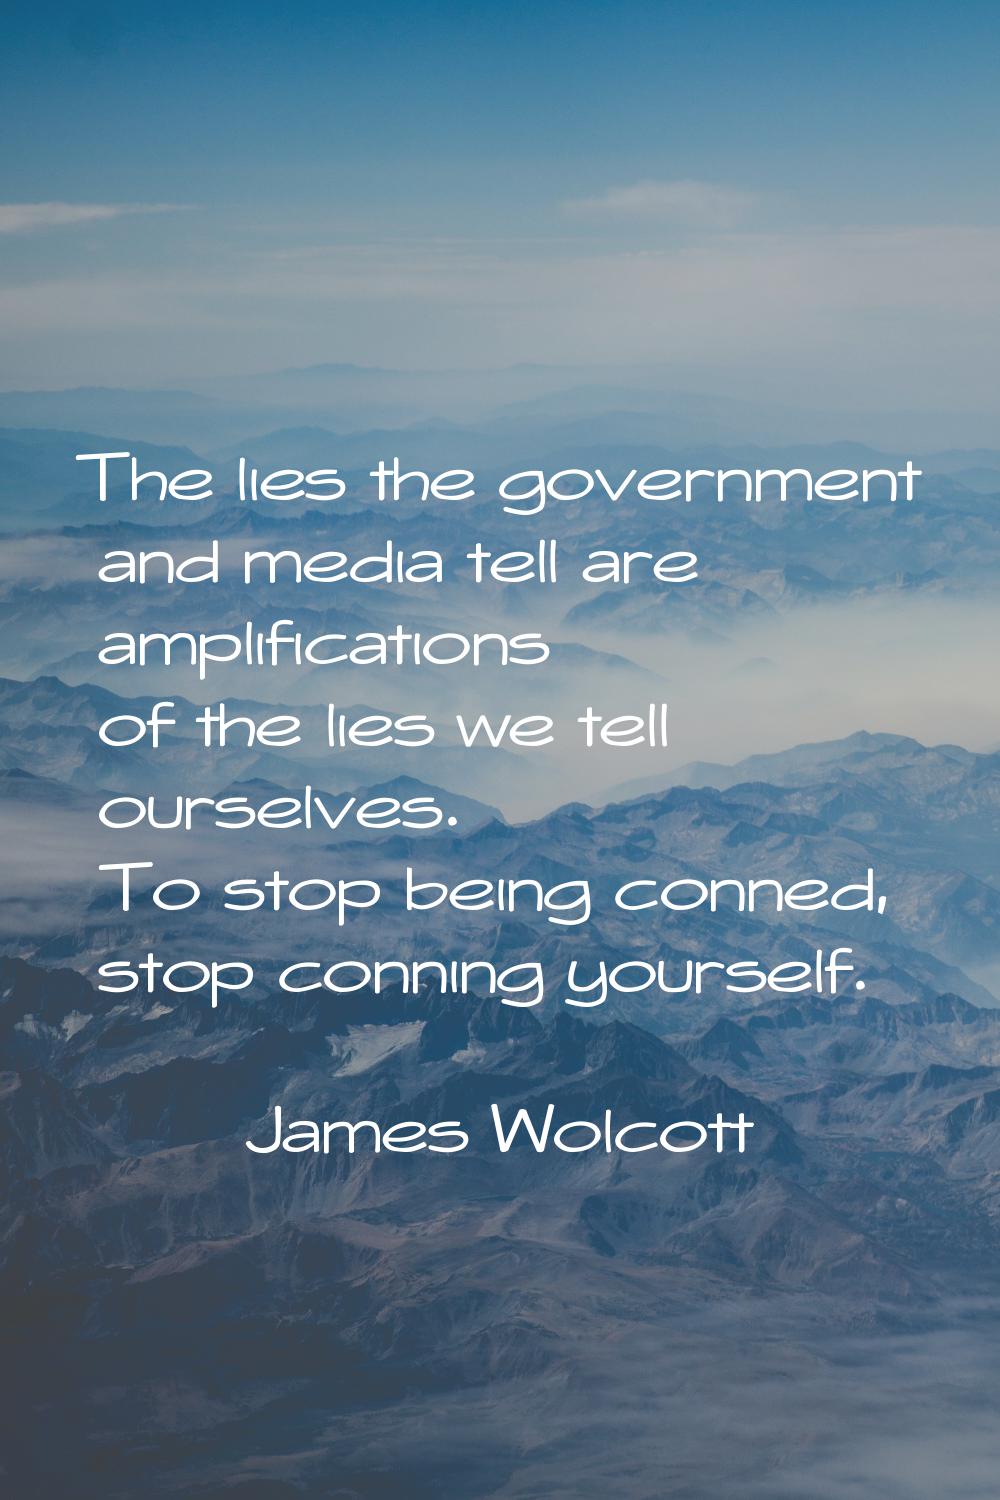 The lies the government and media tell are amplifications of the lies we tell ourselves. To stop be